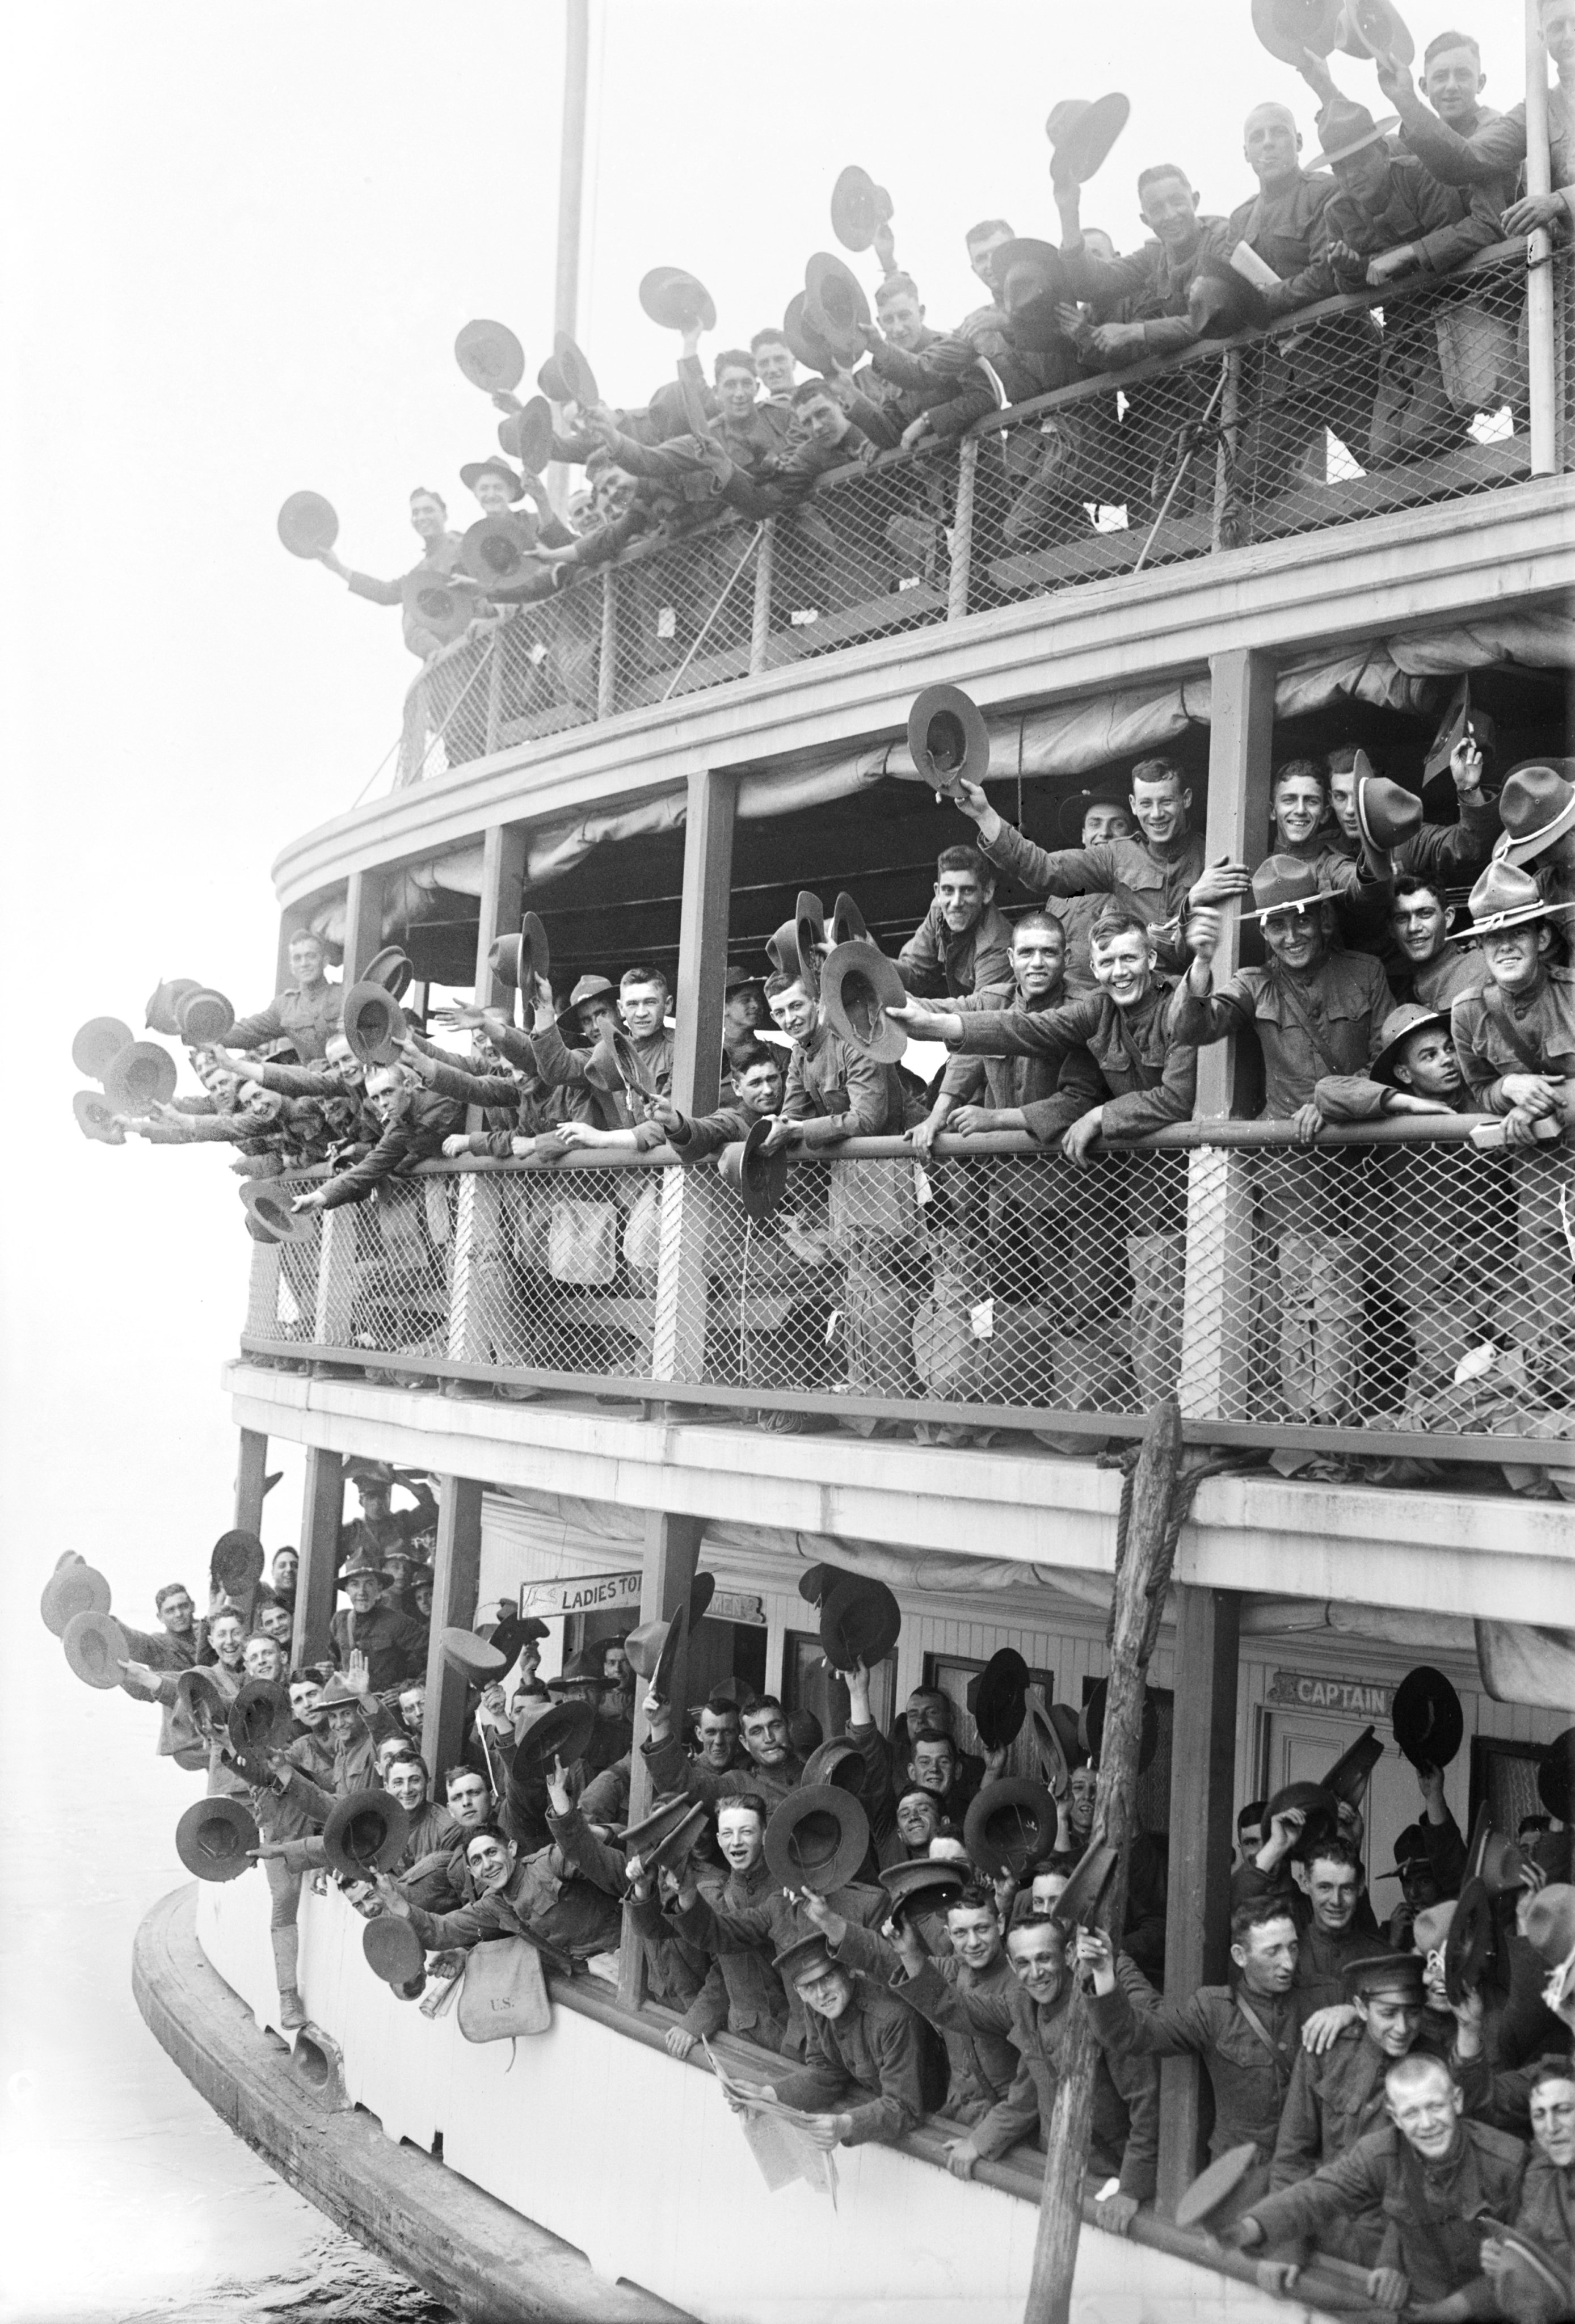 American Soldiers on Boat leaving Fort Slocum, a Military Post that served as Major Recruiting Station during World War I, Davids&#039; Island, New Rochelle, New York, USA, Bain News Service, 1917